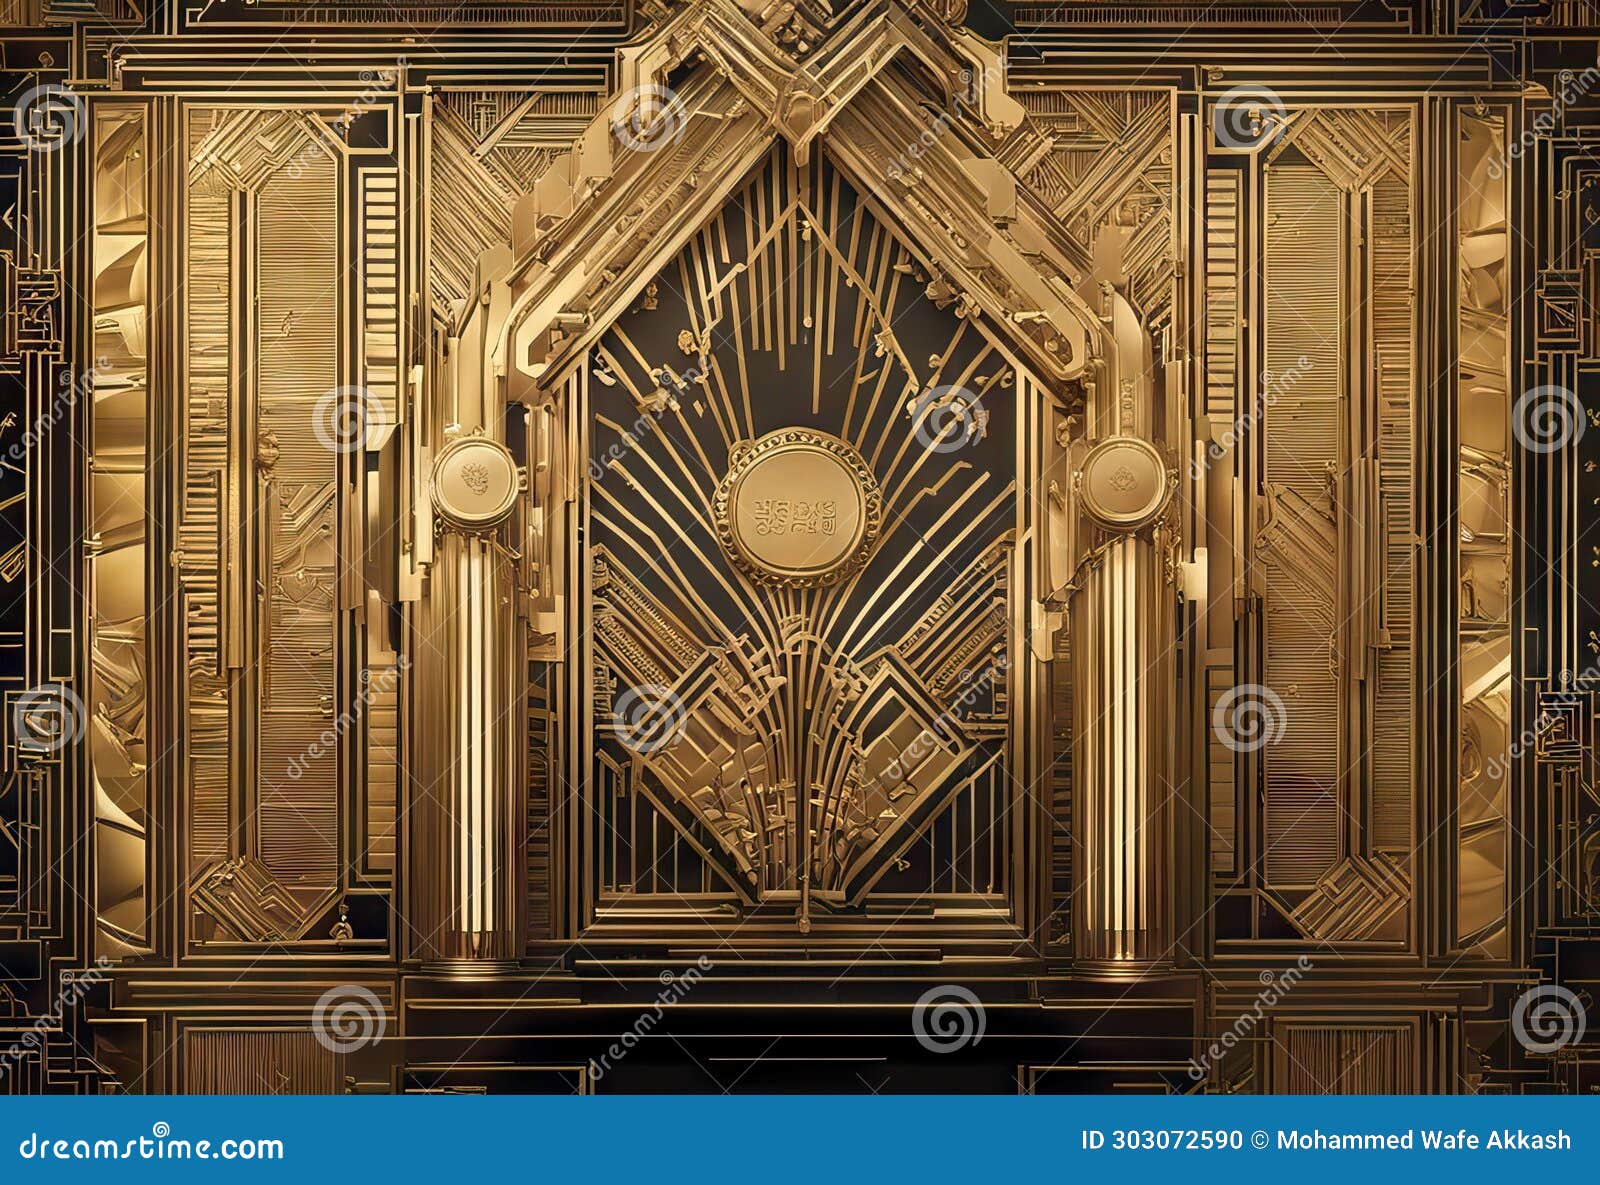 golden anniversary card in art deco style stock videobackgrounds 1920 1929 art deco royalty